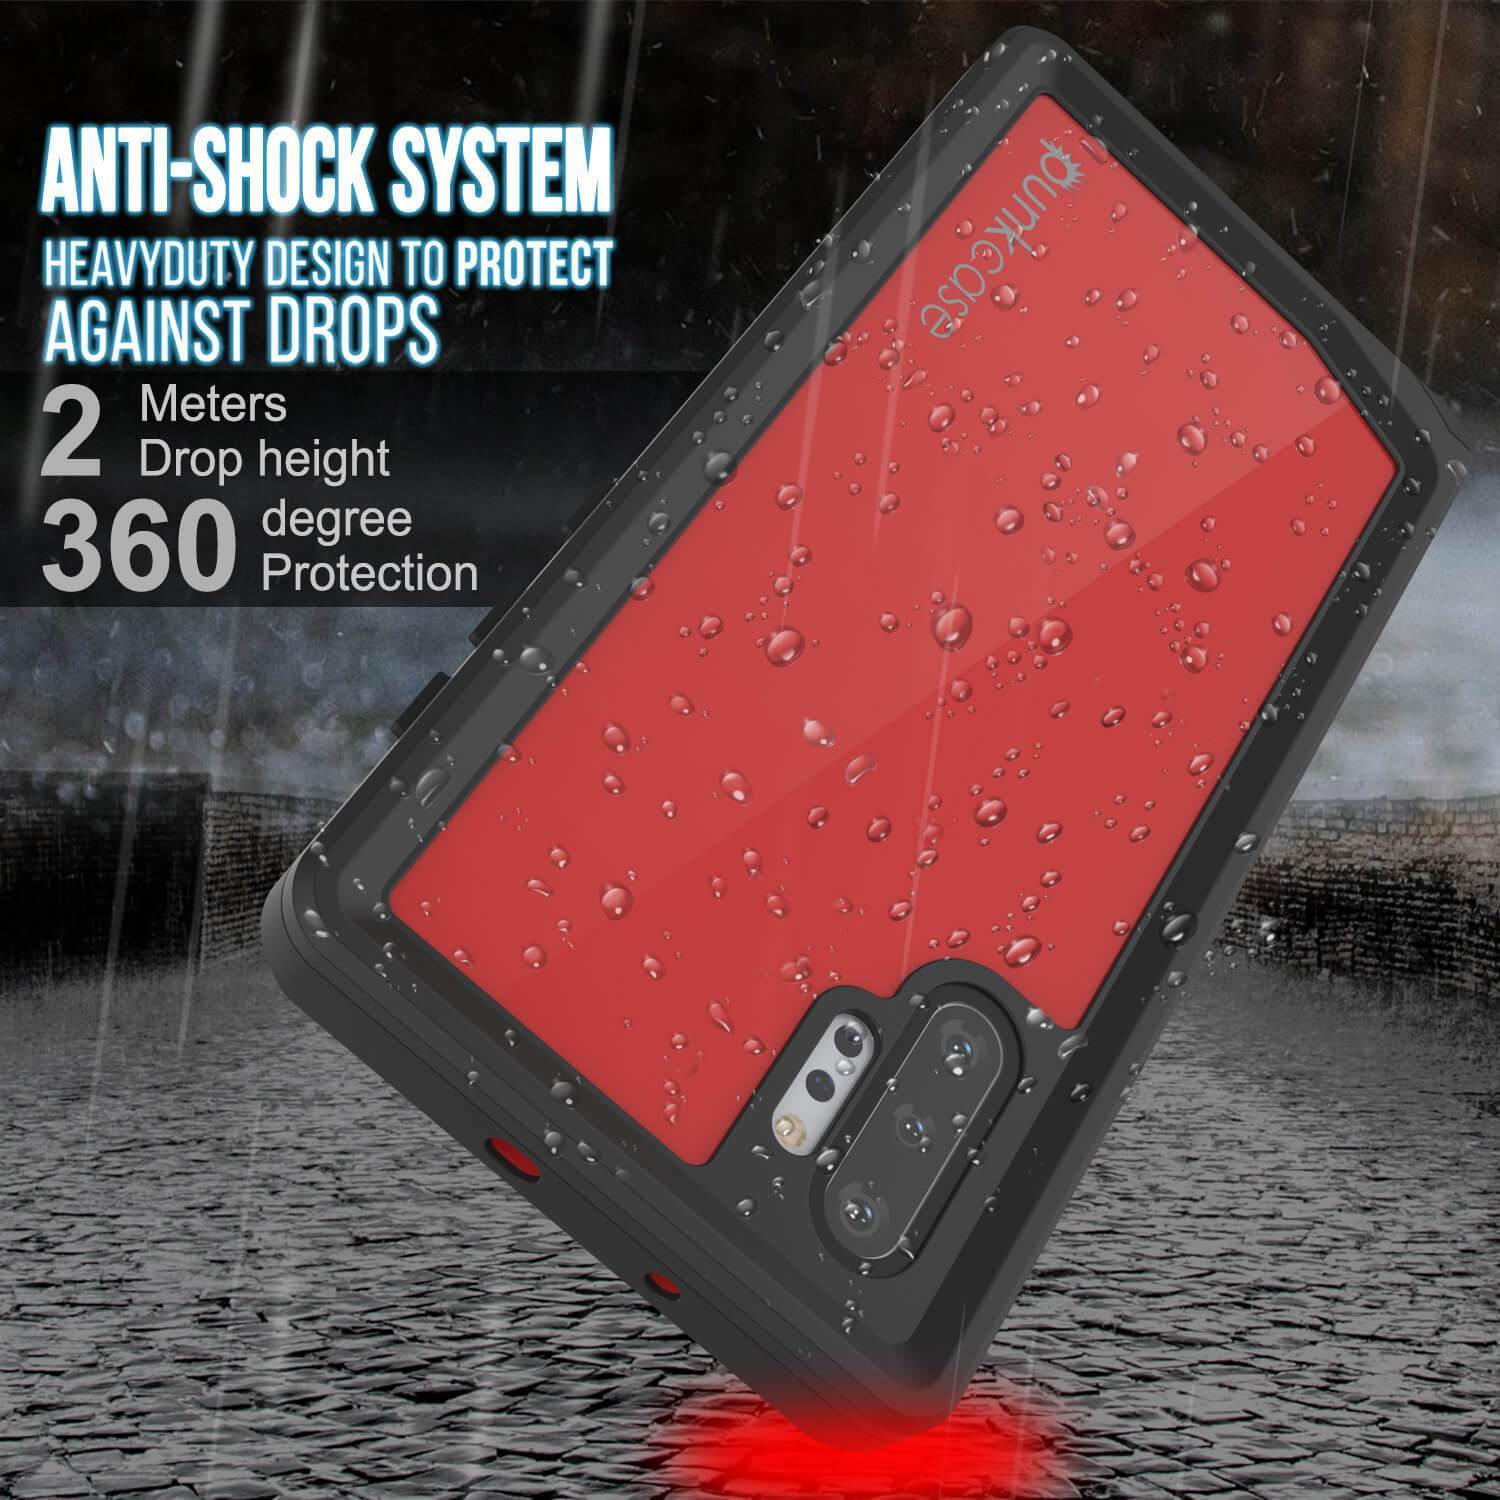 Galaxy Note 10+ Plus Waterproof Case, Punkcase Studstar Red Series Thin Armor Cover